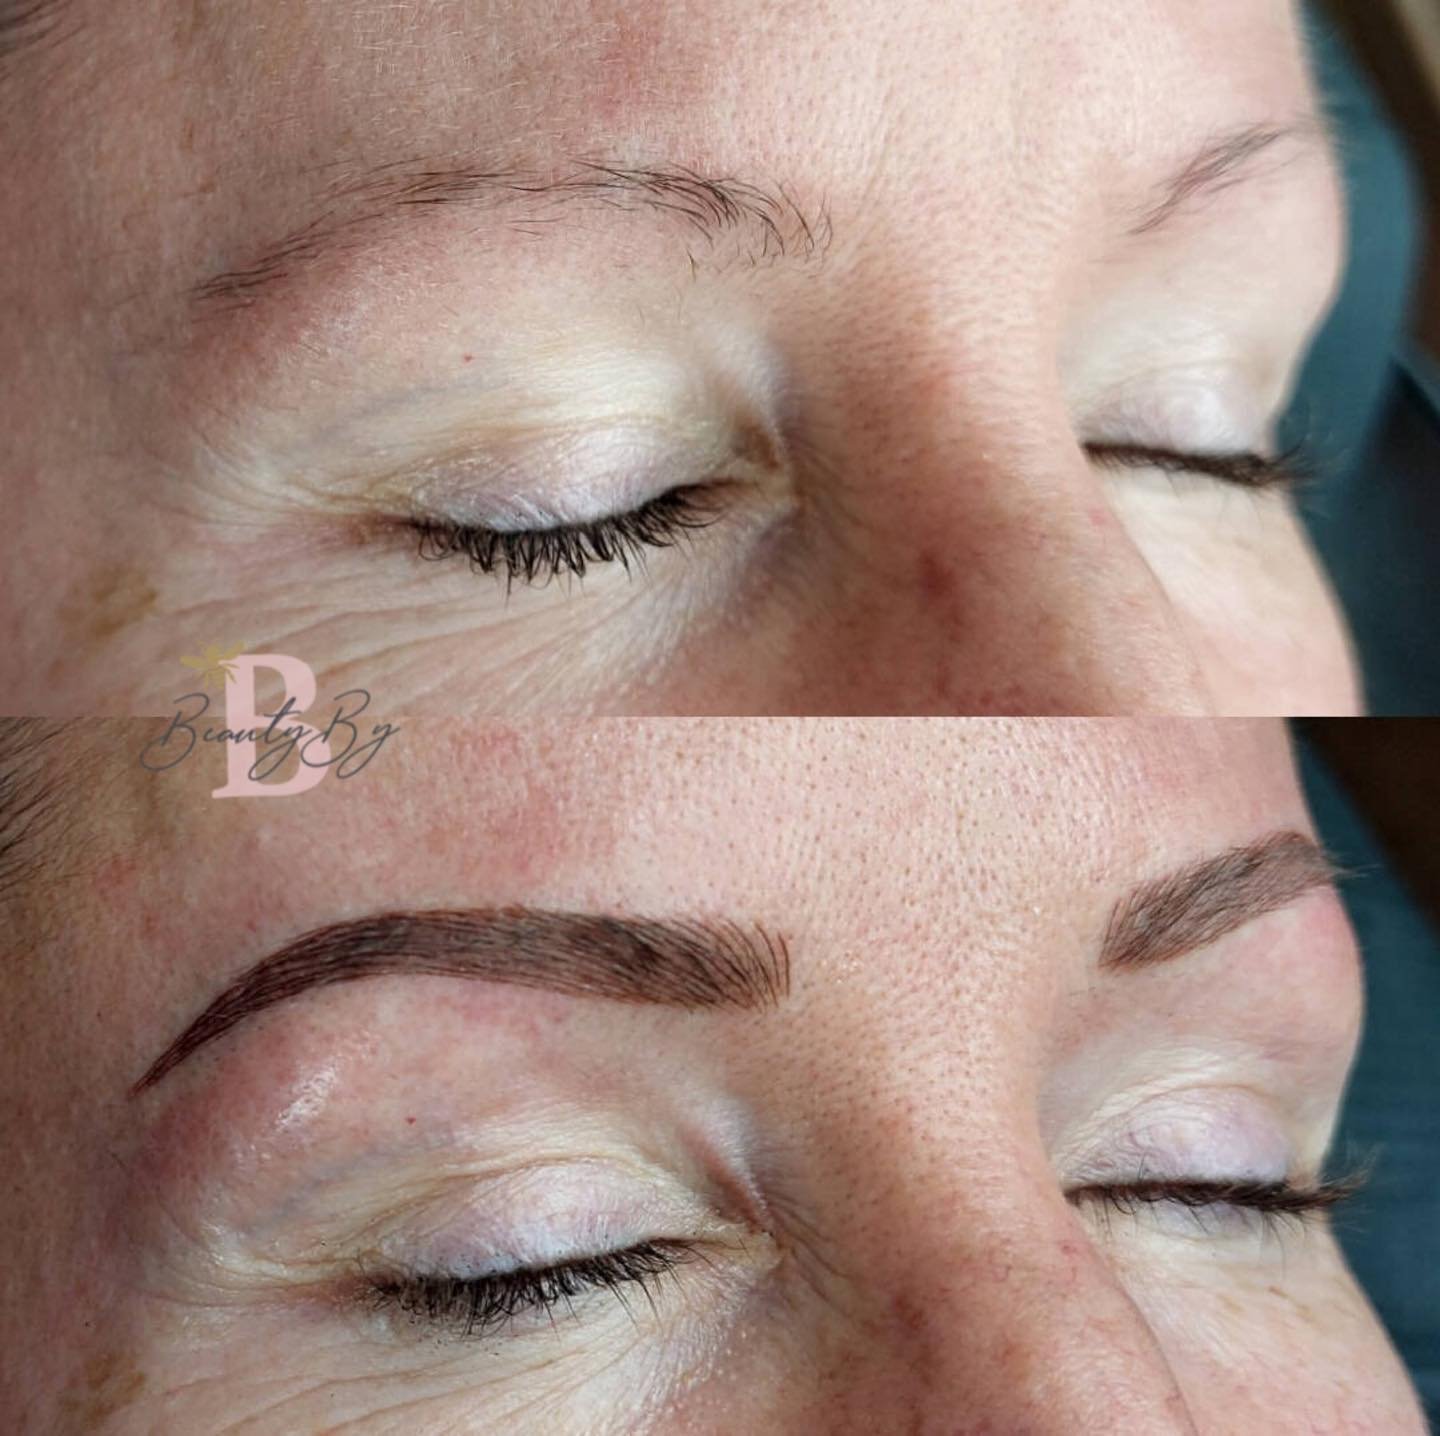 More then an eyebrow! Permanent makeup can help get your time and confidence back 💖
It can be as bold or natural as you wish! Get your brows done now -So you are all healed for summer ✨